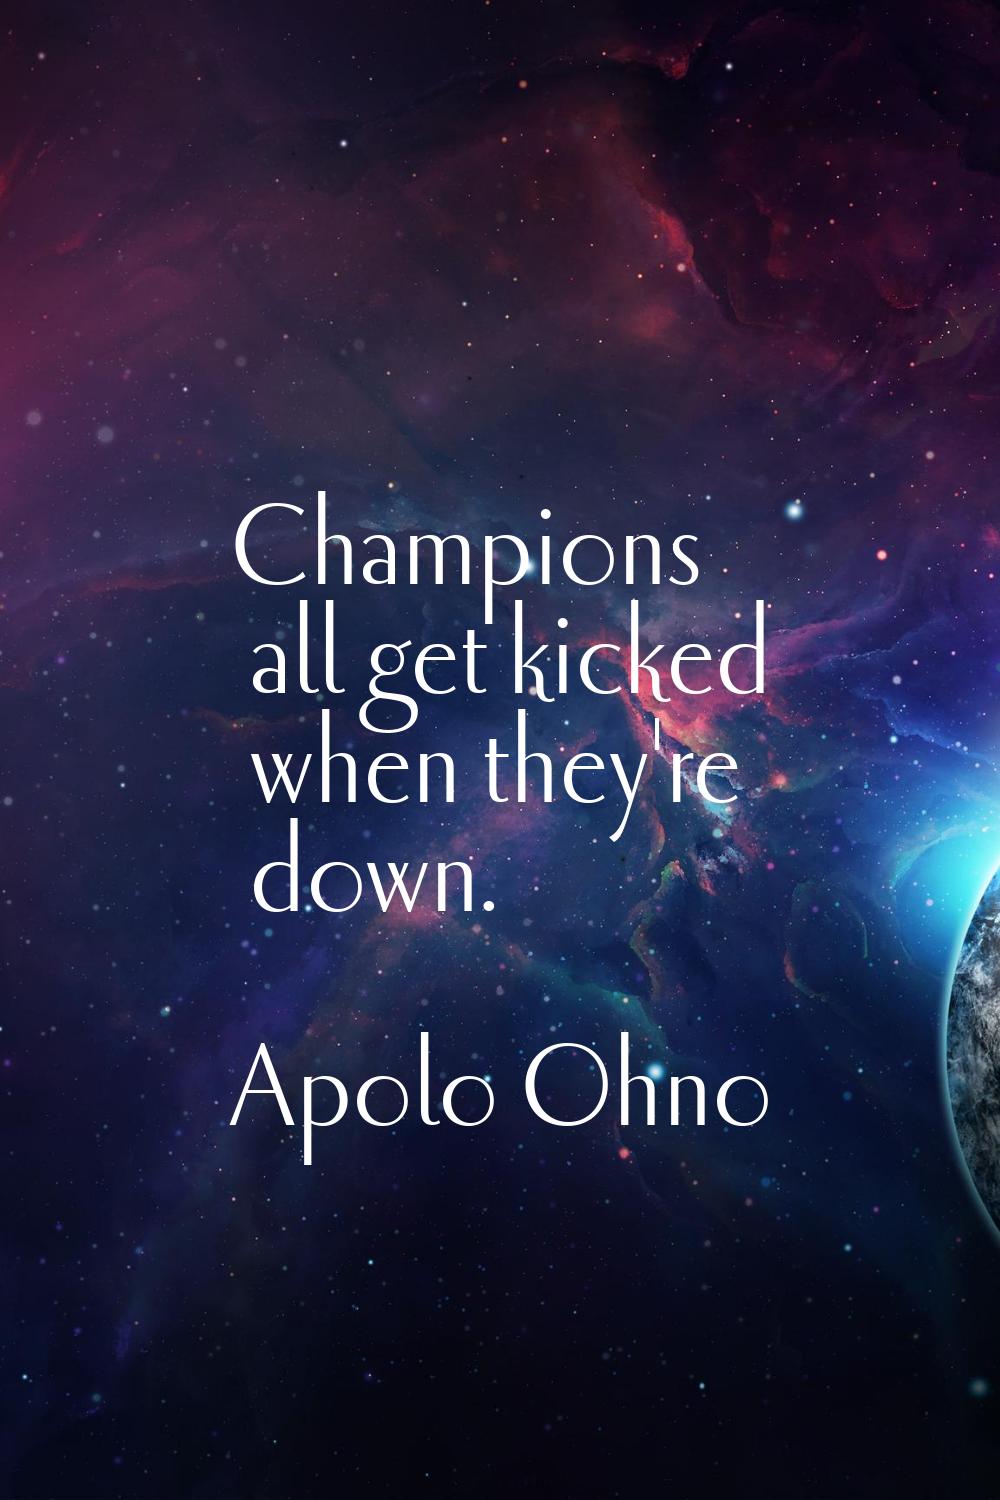 Champions all get kicked when they're down.